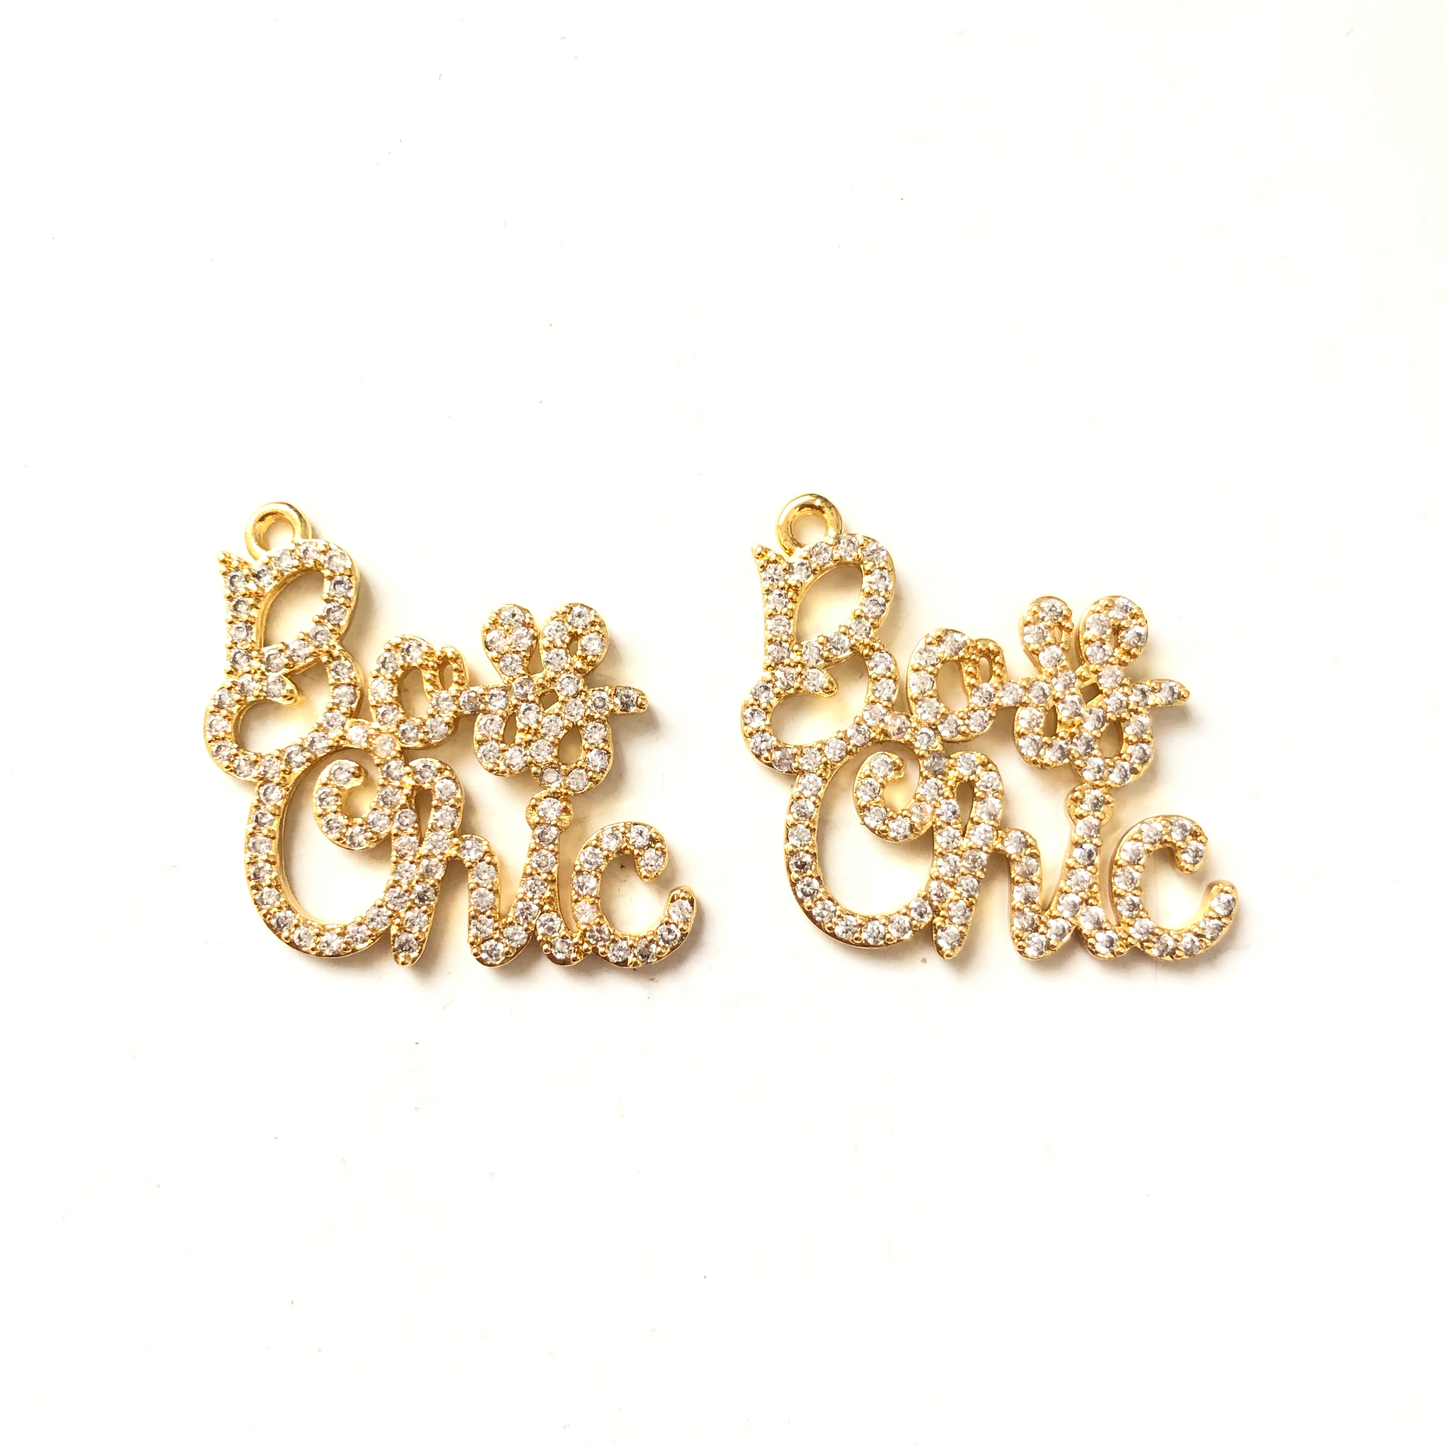 10pcs/lot 30*30mm CZ Paved Boss Chic Charms Gold CZ Paved Charms Words & Quotes Charms Beads Beyond